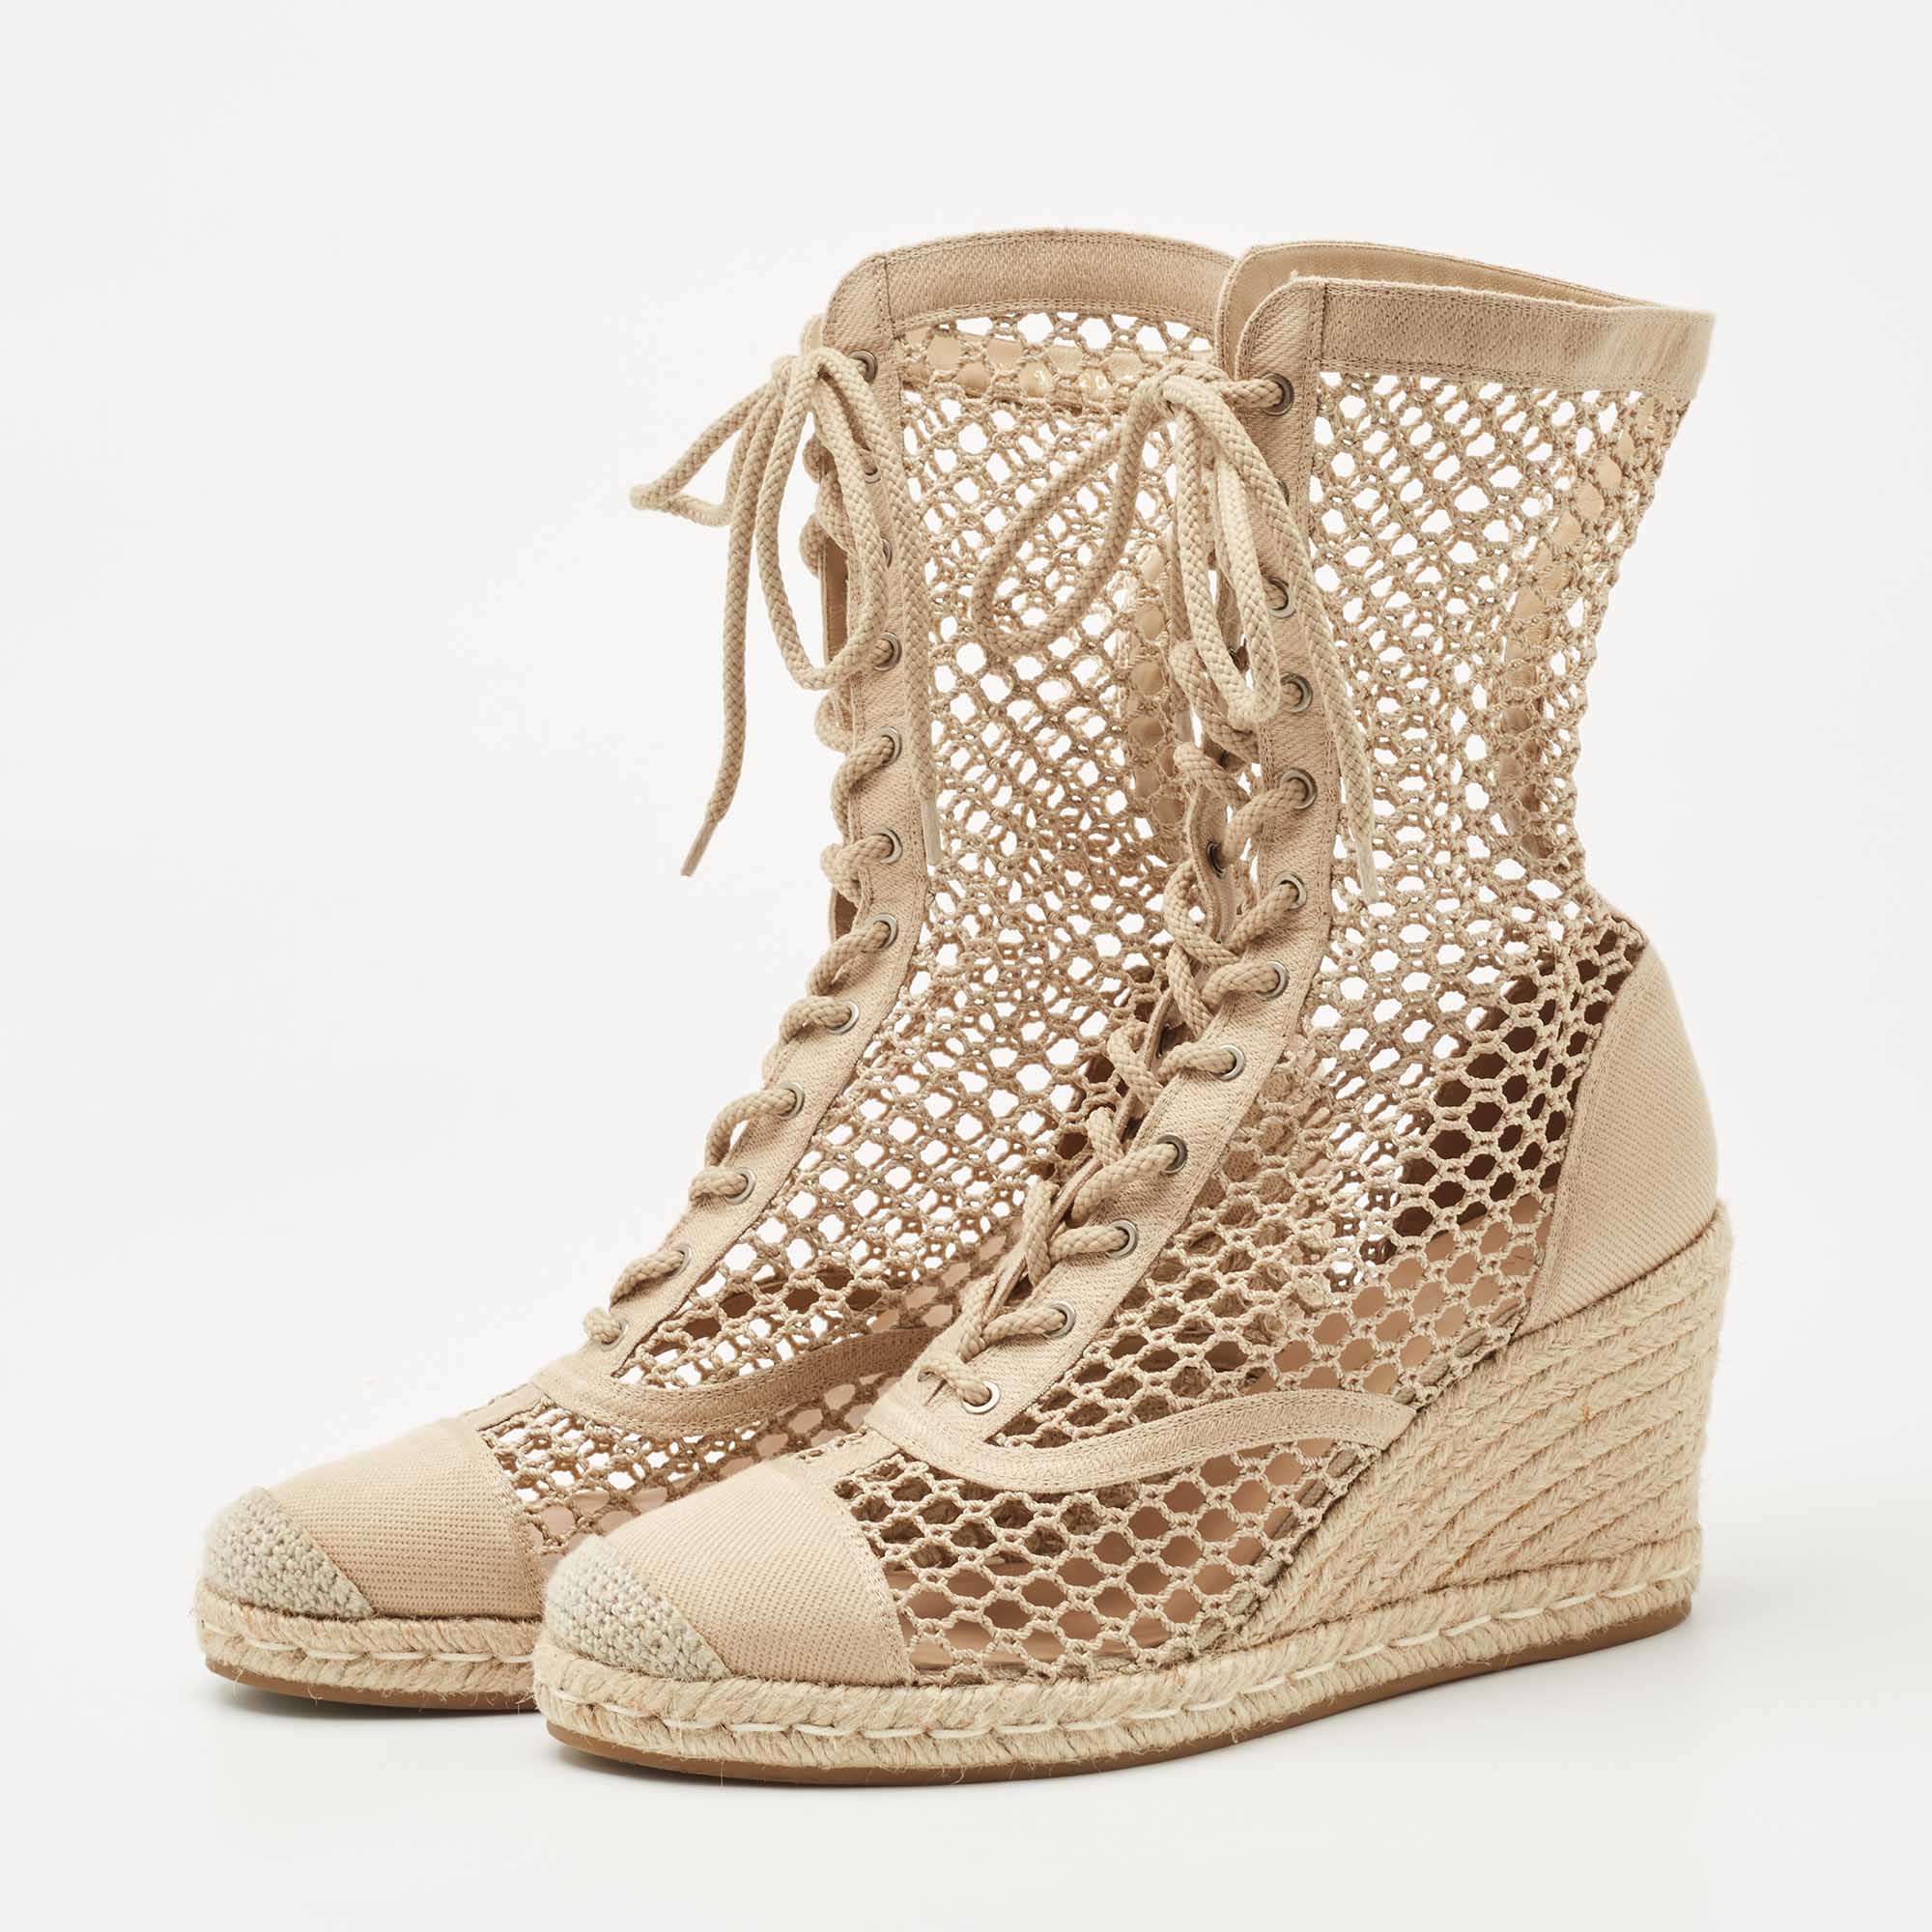 Naughtily-d leather lace up boots Dior Beige size 38 EU in Leather